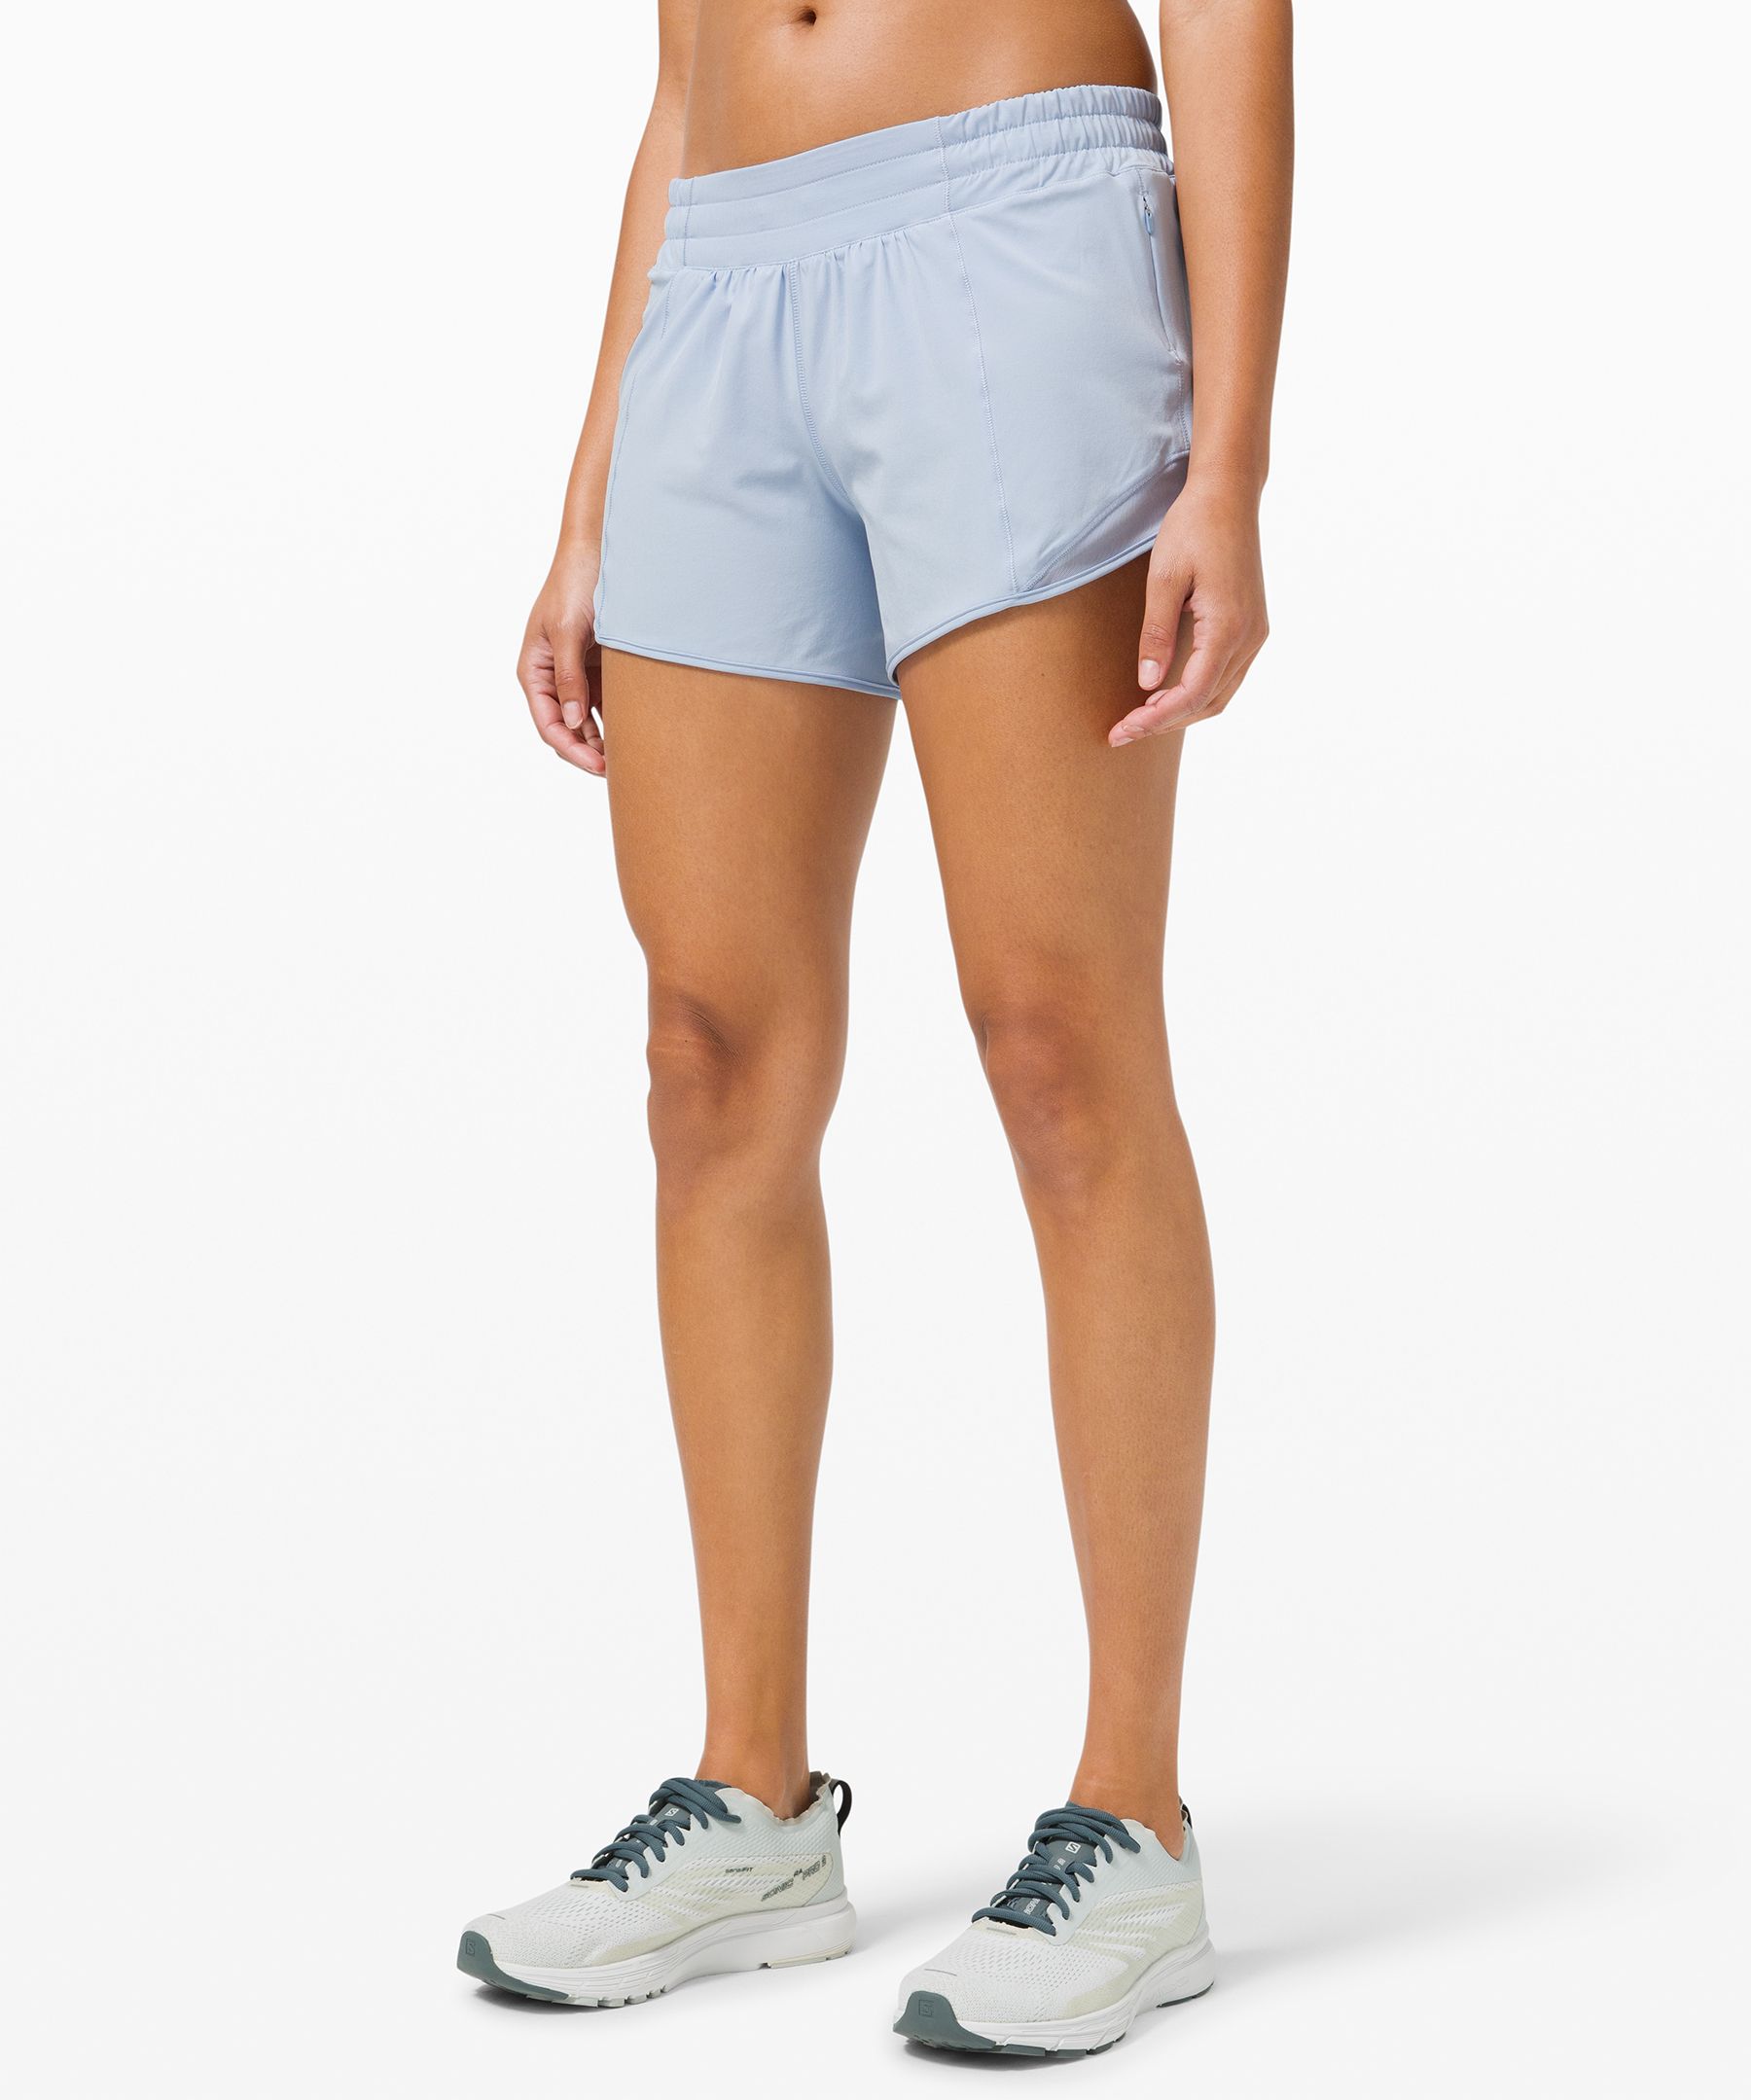 Lululemon Hotty Hot Low-rise Lined Shorts 4" In Blue Linen